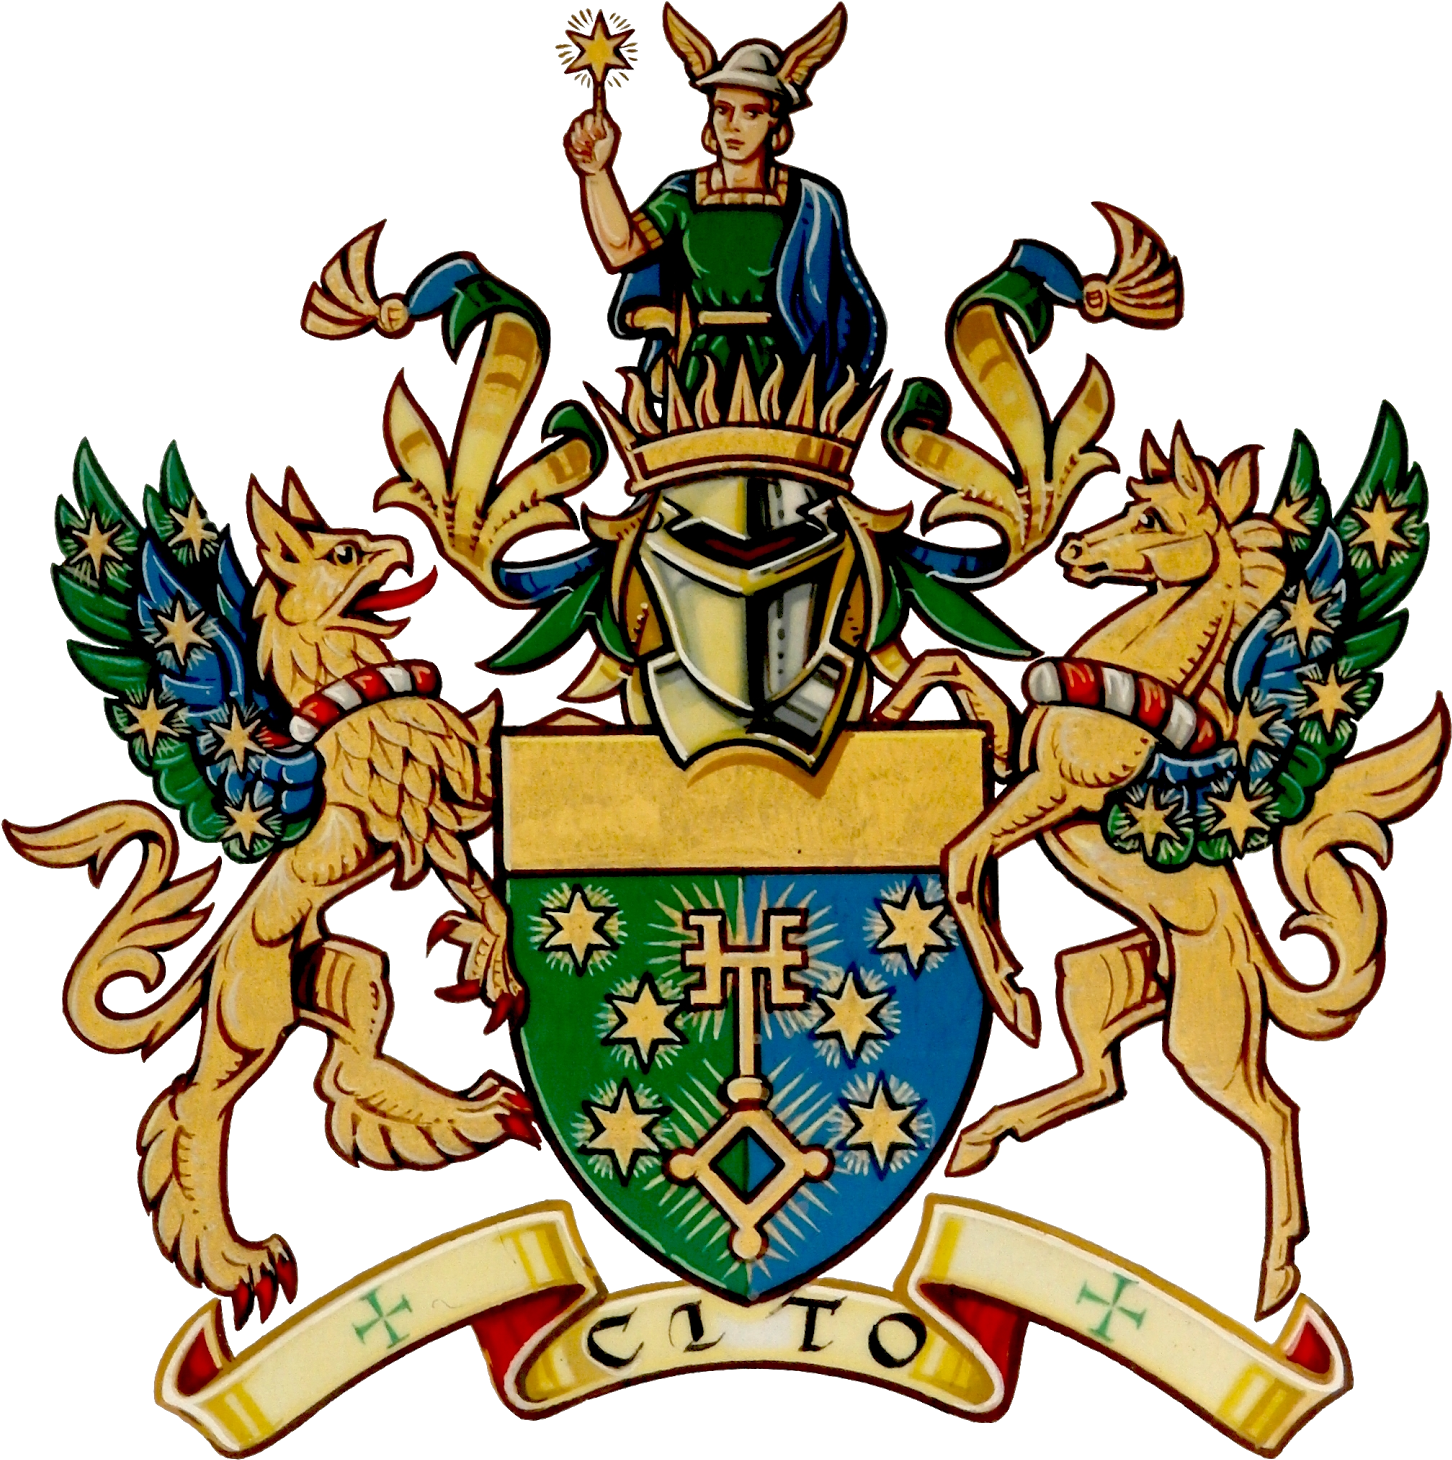 The Arms, Crest And Supporters Of The Worshipful Company - Worshipful Company Of Information Technologists (1600x1535)